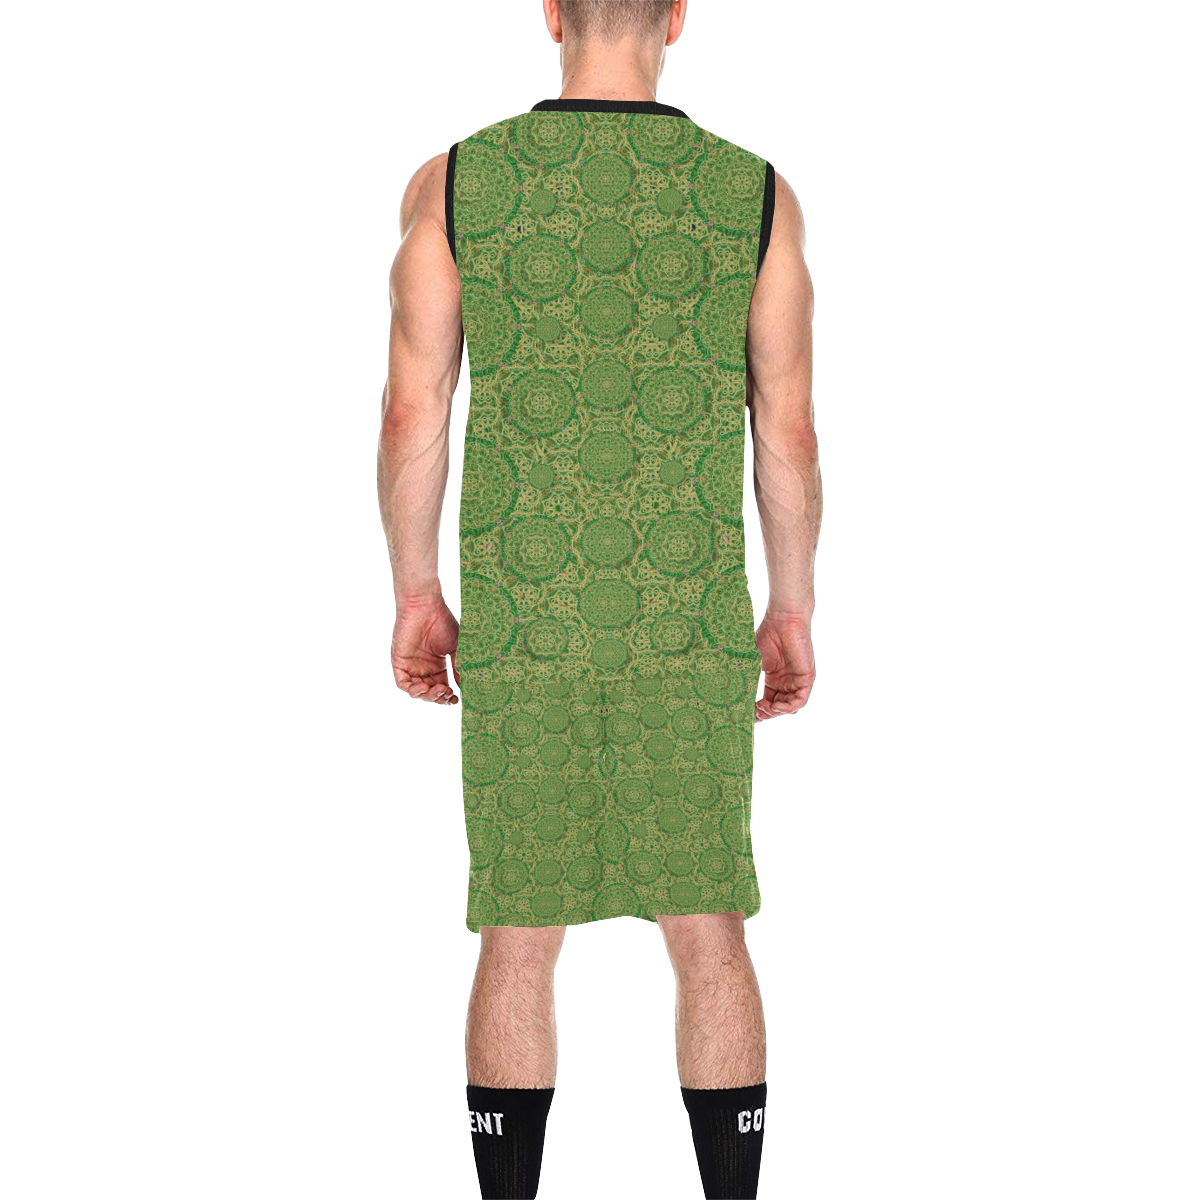 Stars in the wooden forest night in green All Over Print Basketball Uniform